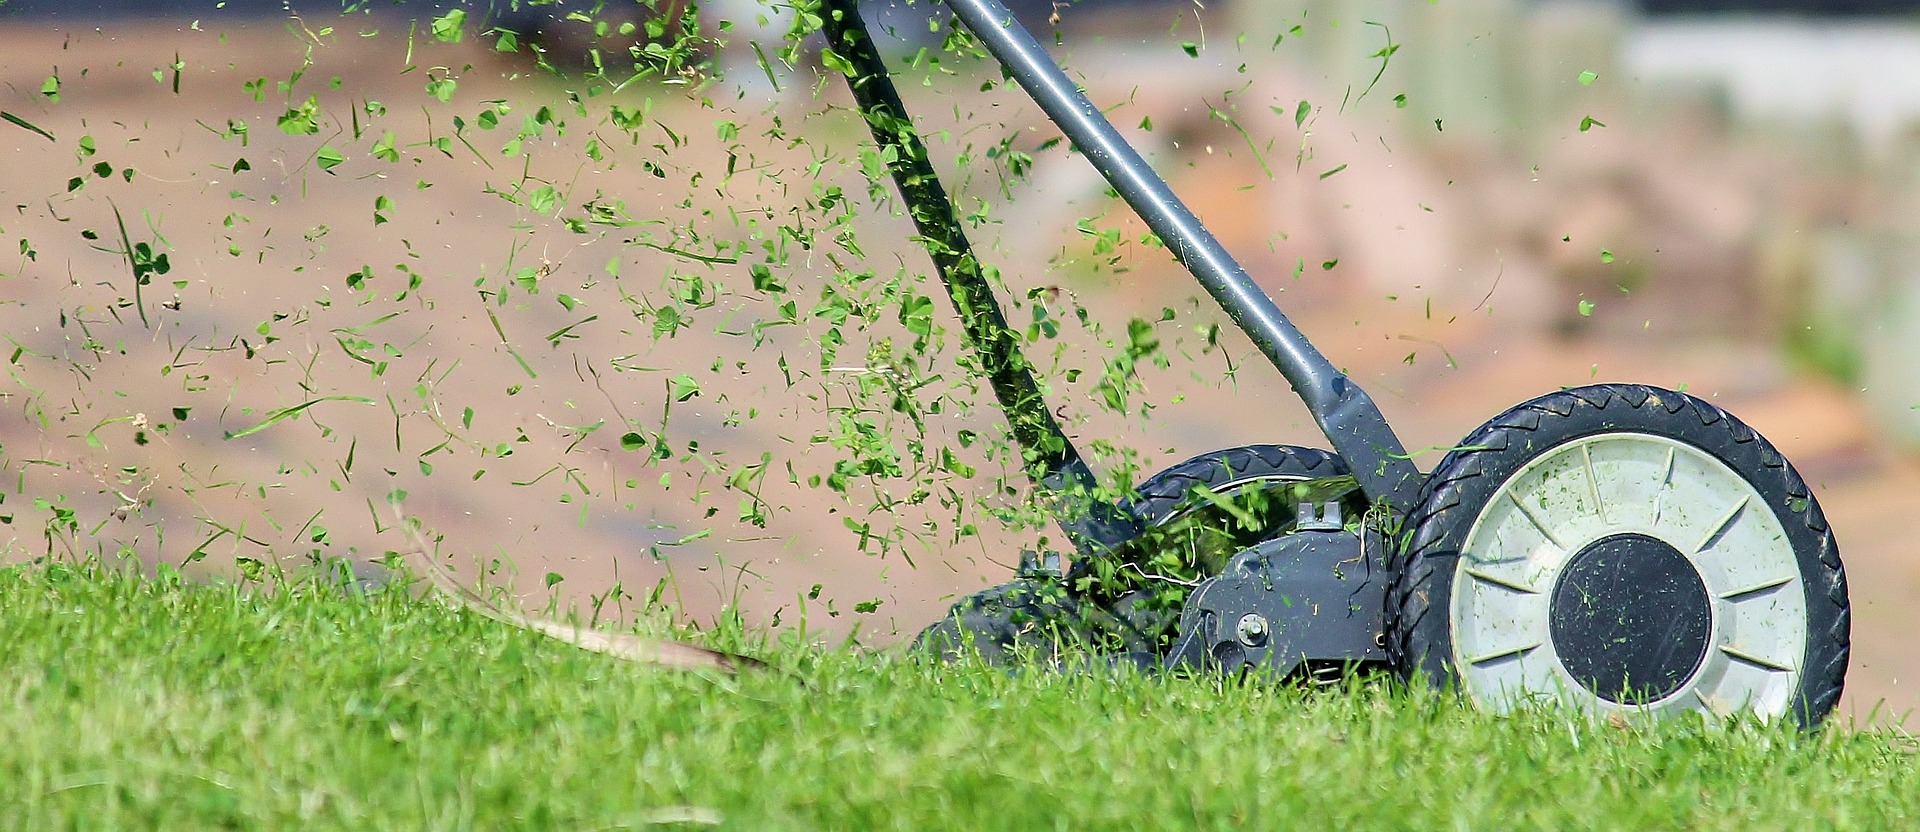 lawn mover cutting grass